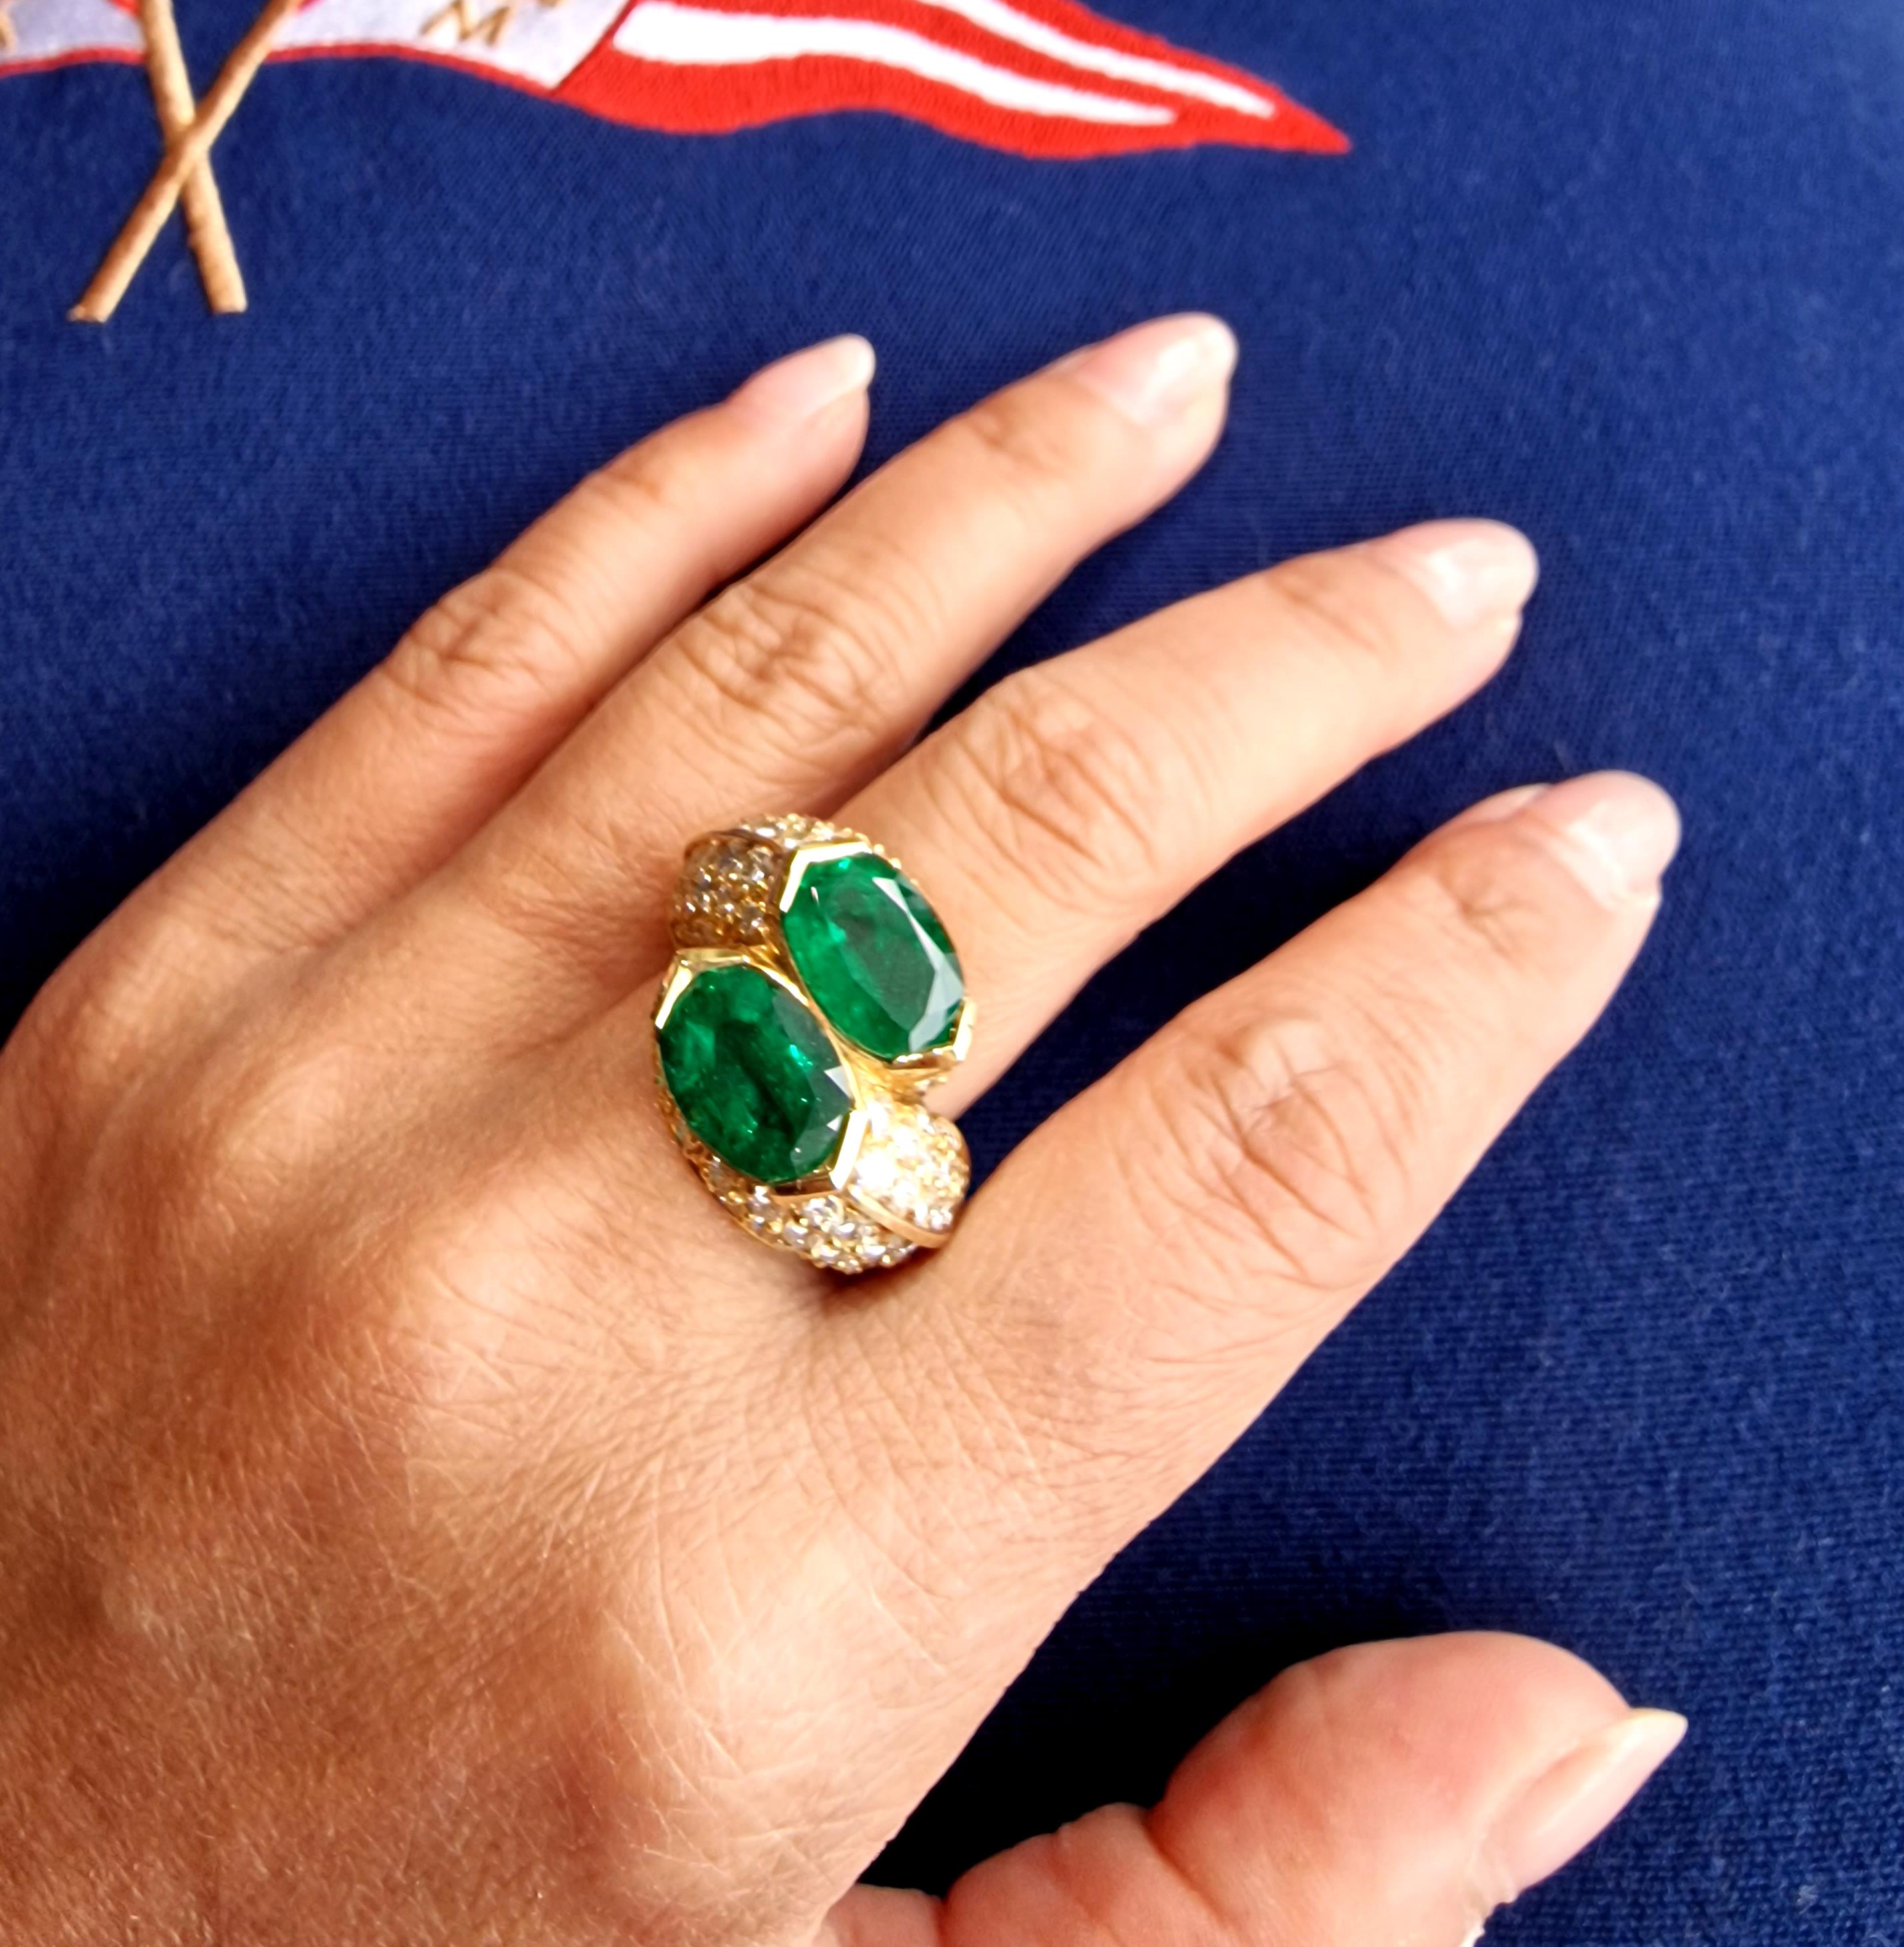 Twin perfectly matched fine oval cut Zambian emeralds of intense green with minor clarity enhancement, each weighing 2.7cts (total weight 5.4cts) held in 18ct yellow gold with brilliant cut accent diamonds set into the shoulders and bezel.
Capture